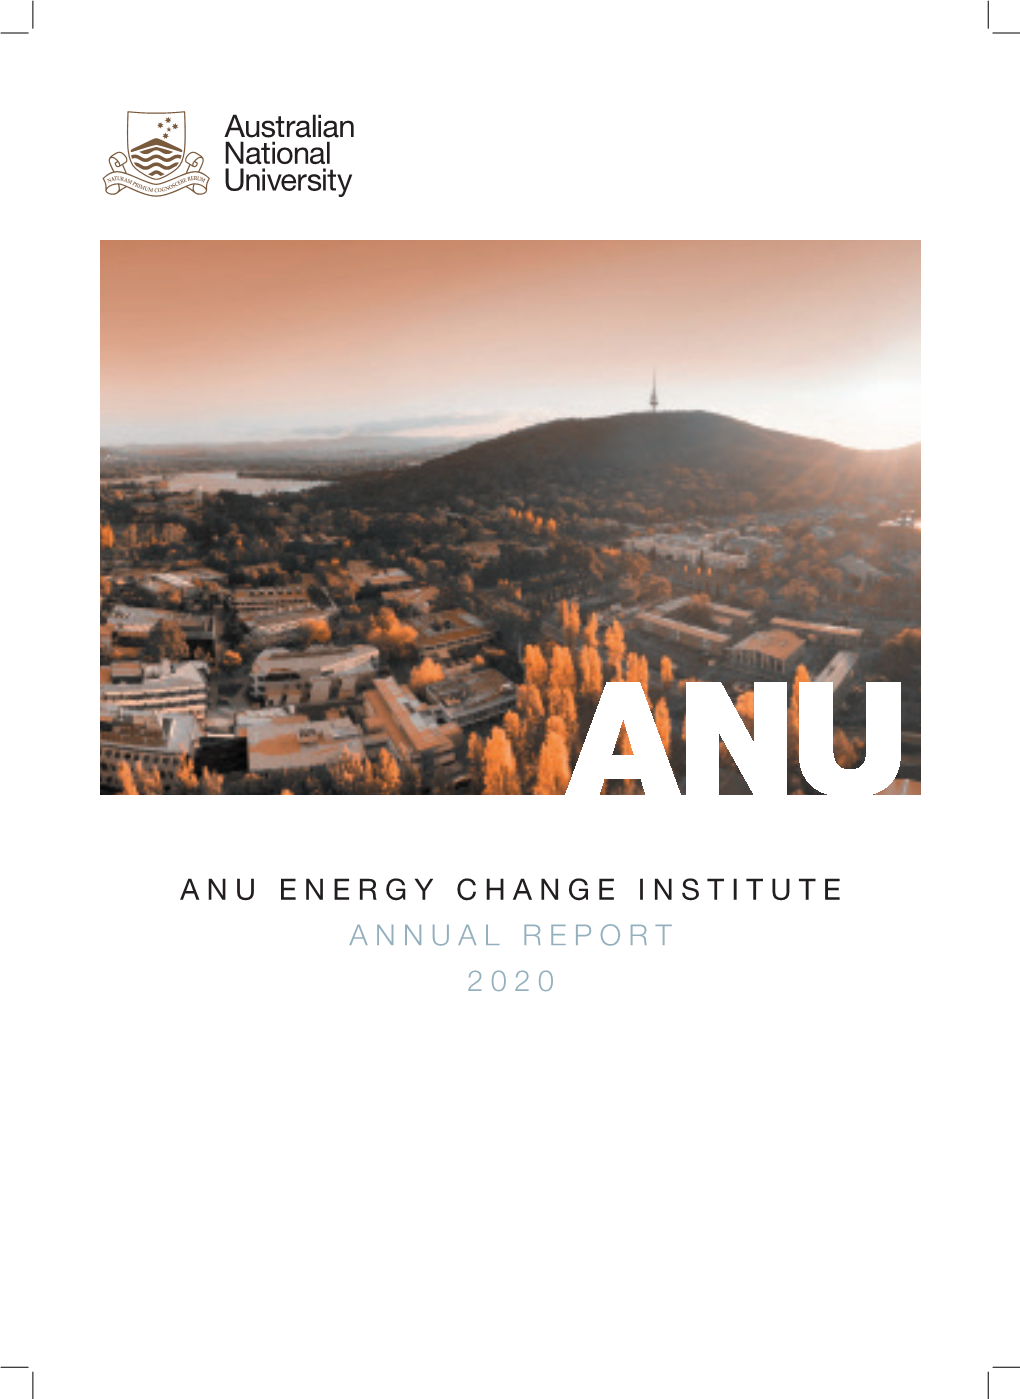 Anu Energy Change Institute Annual Report 2020 Contents